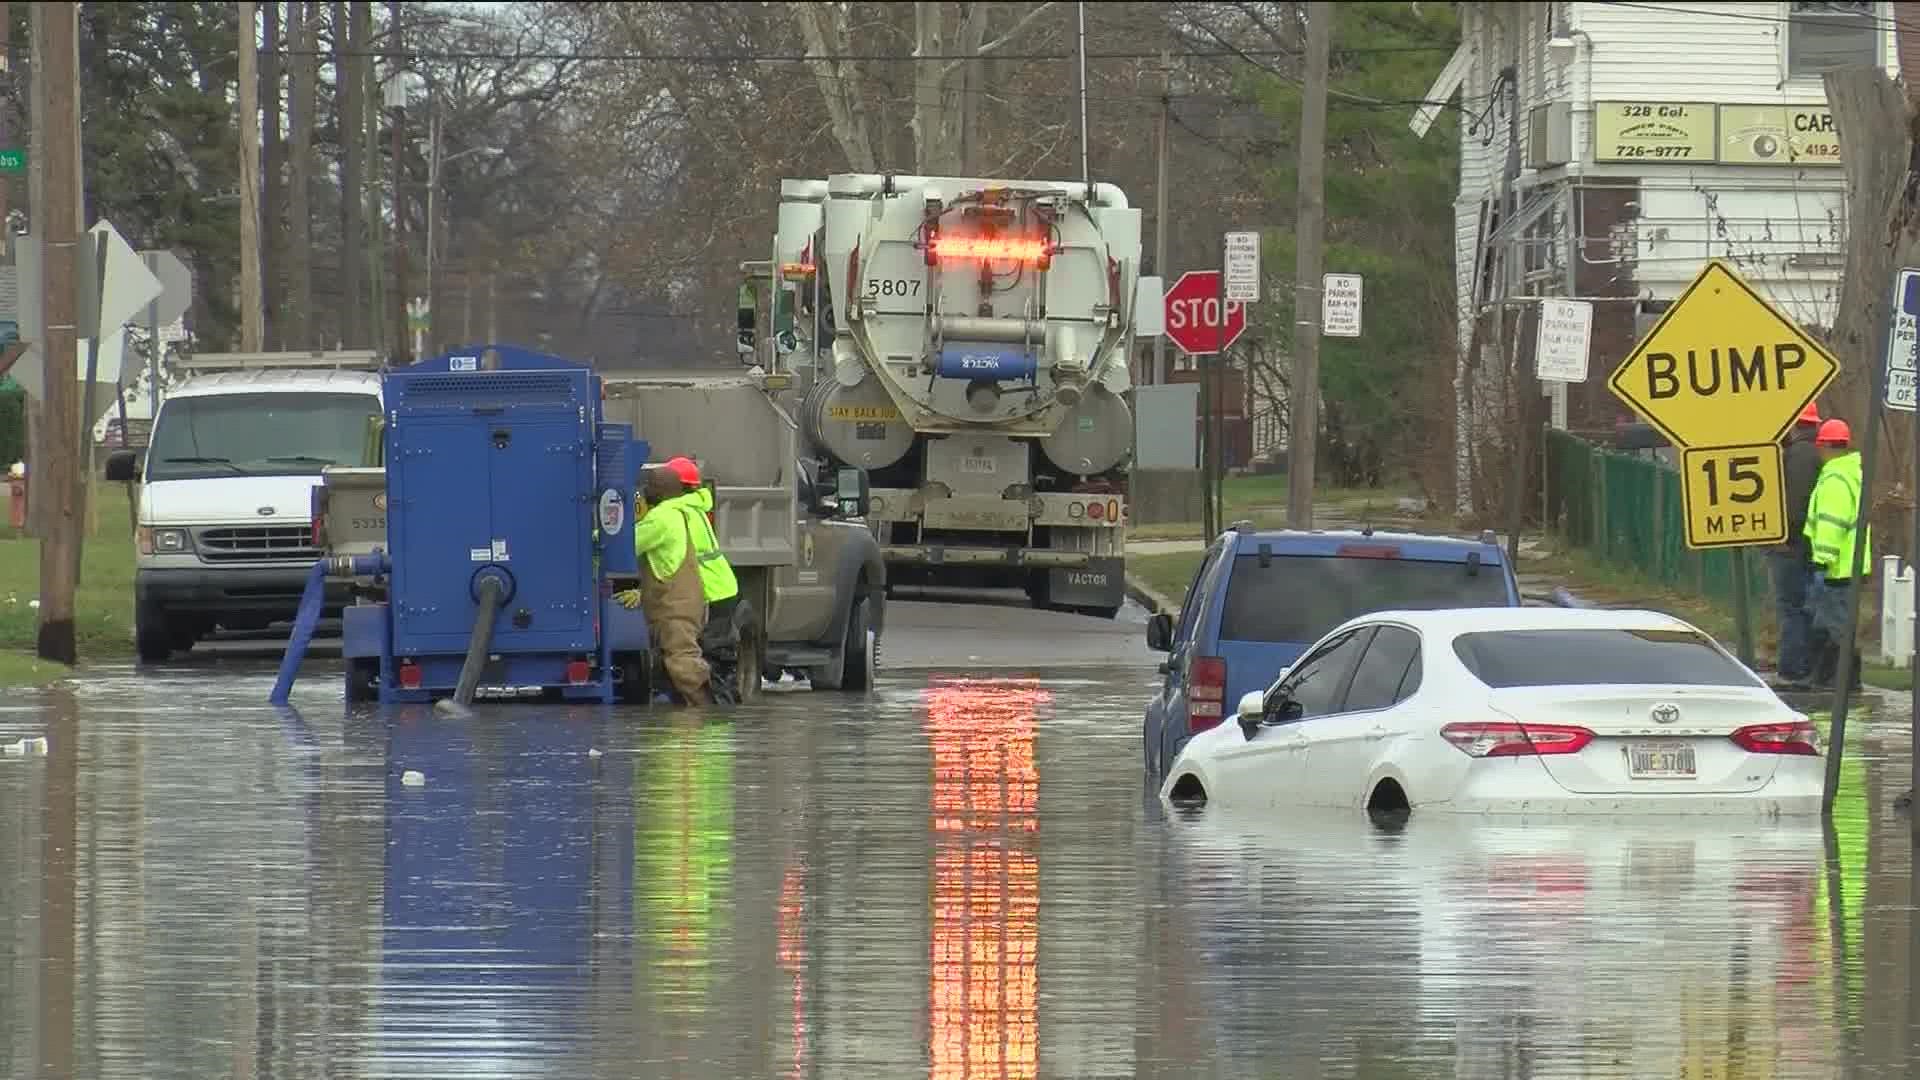 Millions of gallons of water erupted when a burst distribution pipe in north Toledo flooded a dozen streets. Hundreds of residents face extensive damage to property.